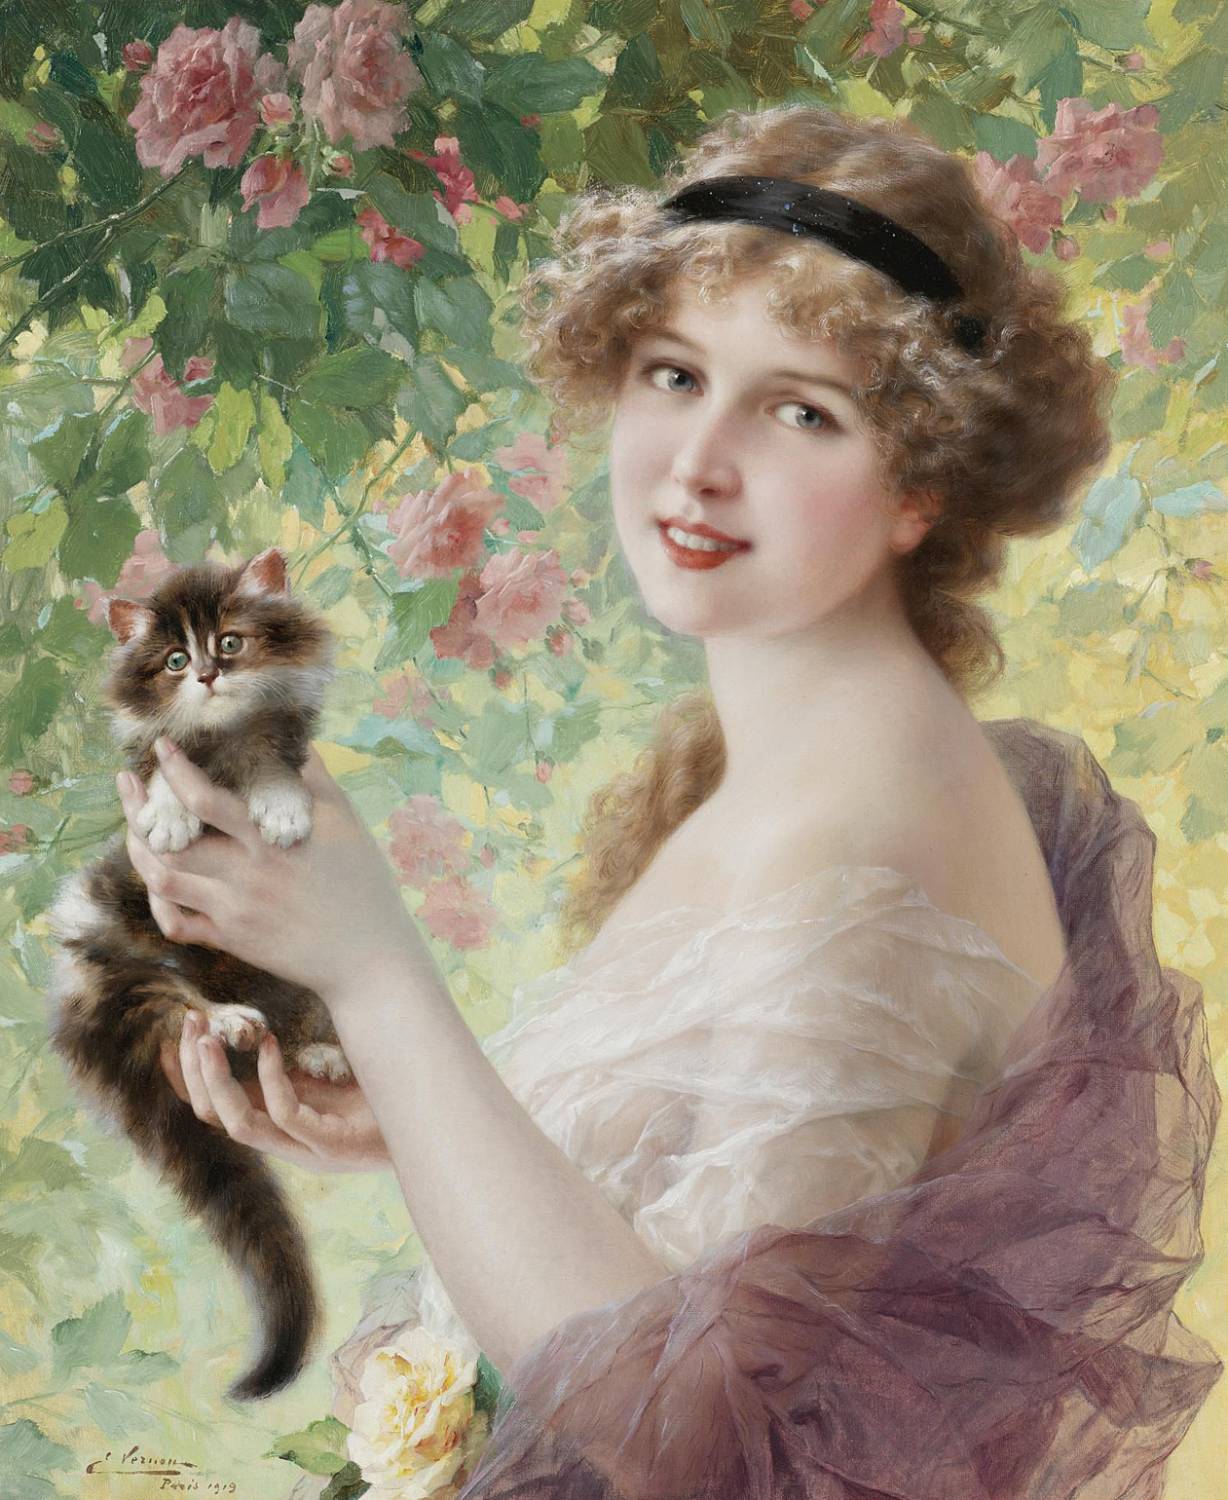 Her most precious by Emile Vernon - 1919